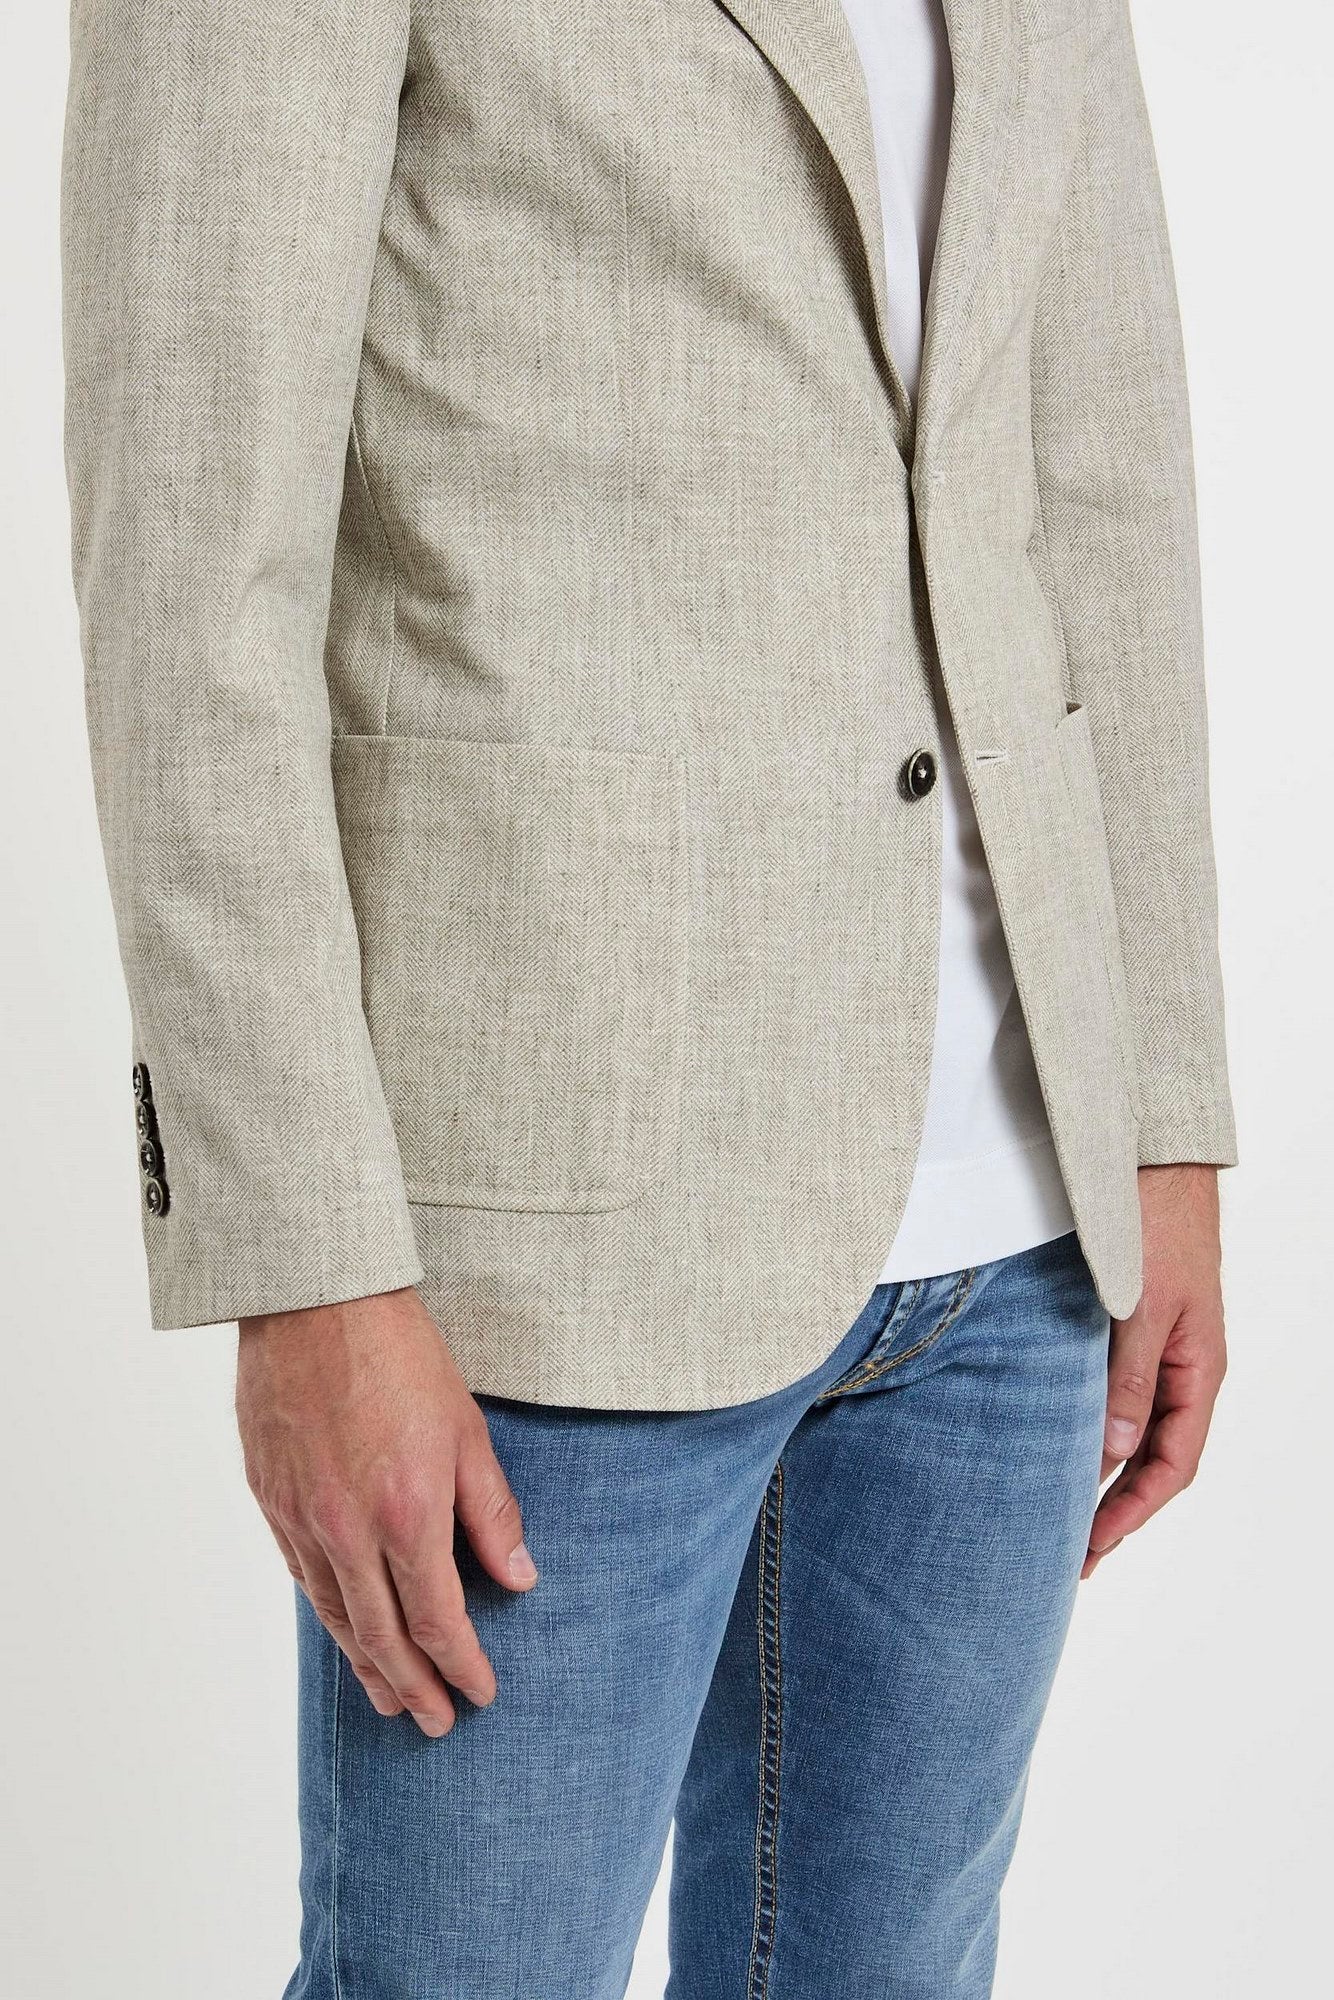 Circolo 1901 Cotton Jacket in Natural Beige-4